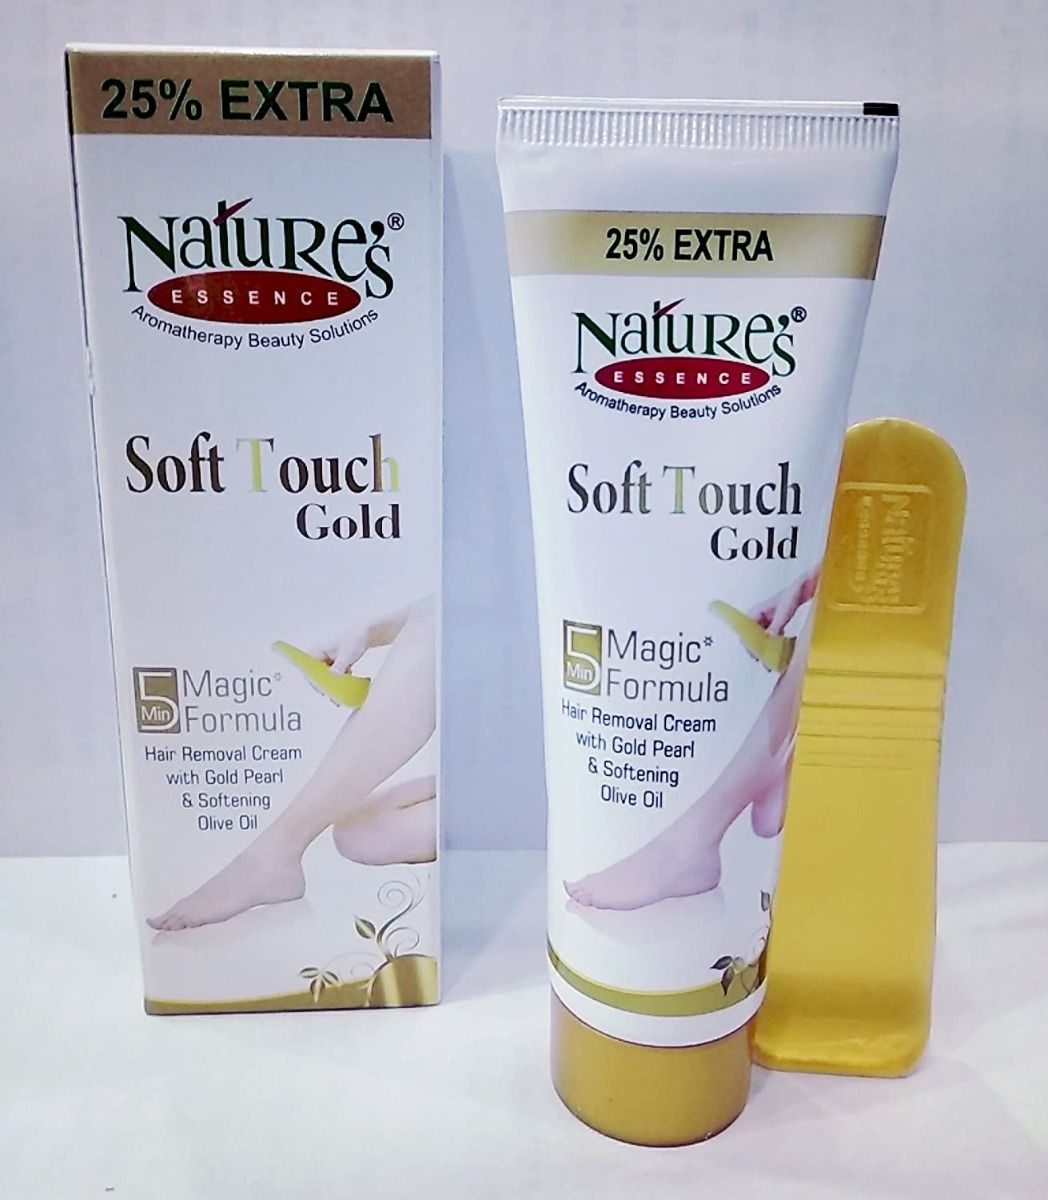 Nature's Essence Soft Touch Gold Hair Removal Cream, 50 ml Price, Uses,  Side Effects, Composition - Apollo Pharmacy